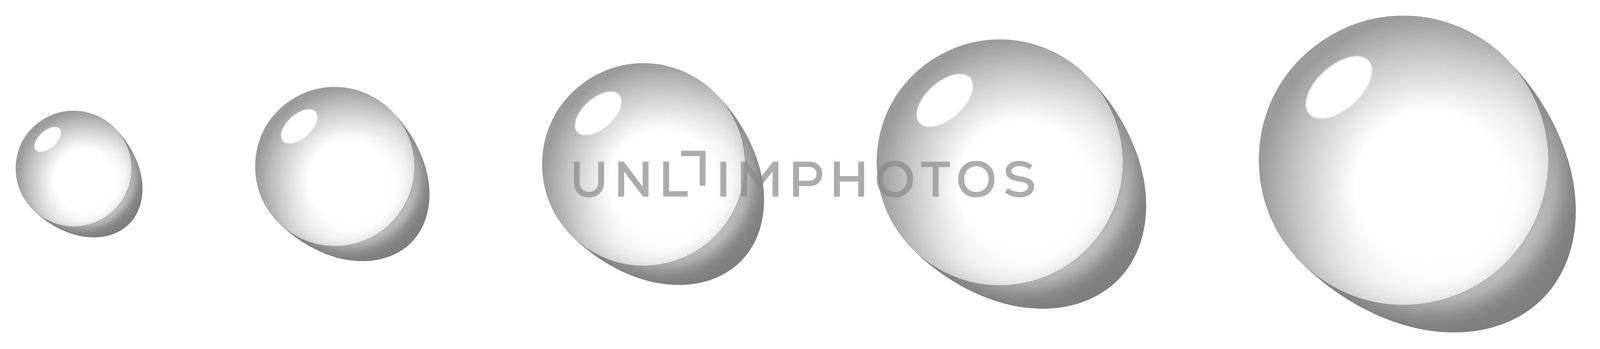 transparent drop icon set with shadow on white background illustration